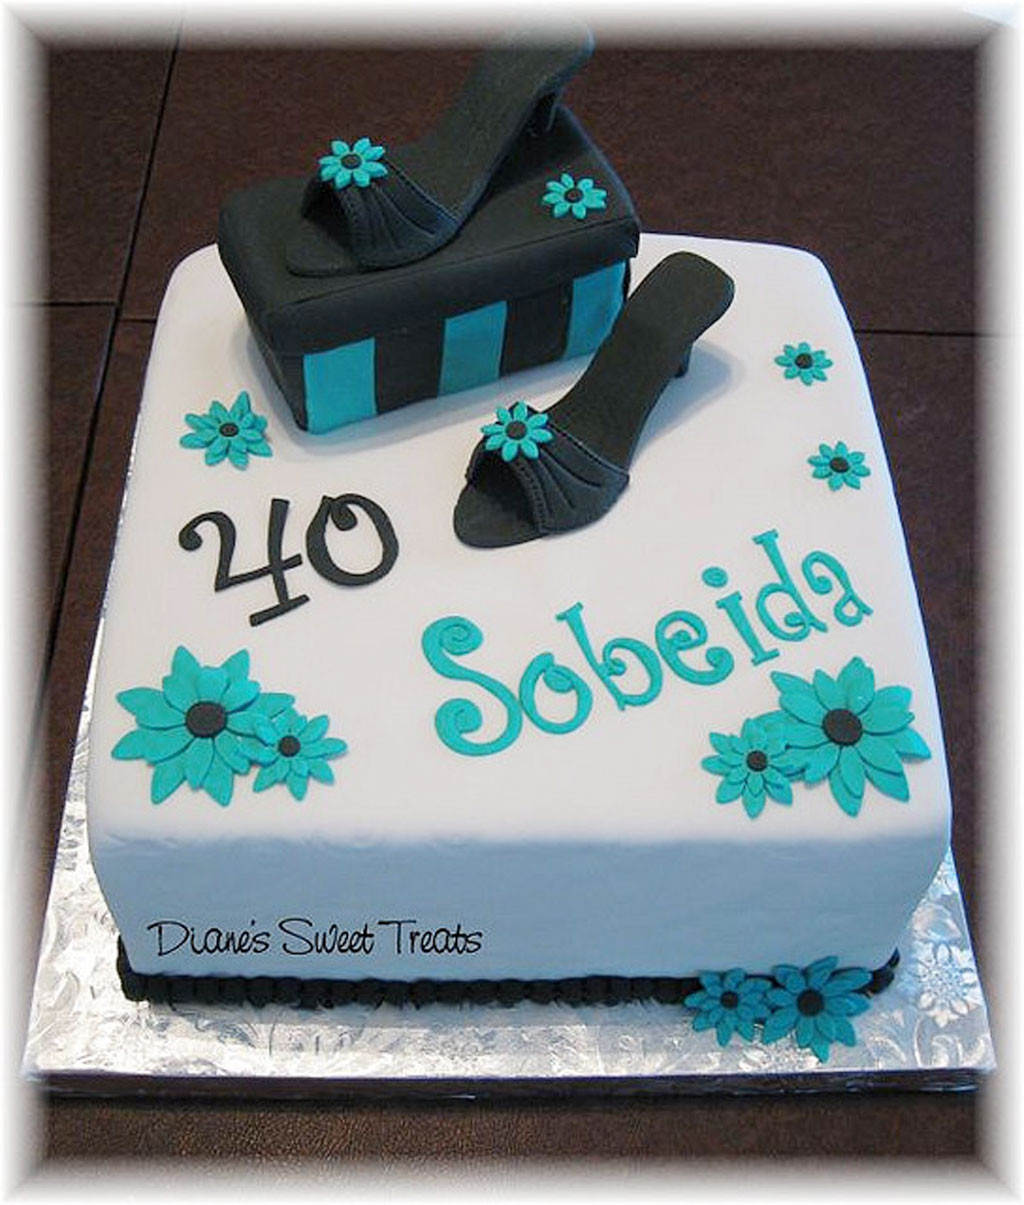 Pictures Of Funny Birthday Cakes
 Funny Birthday Cakes For Women Birthday Cake Cake Ideas